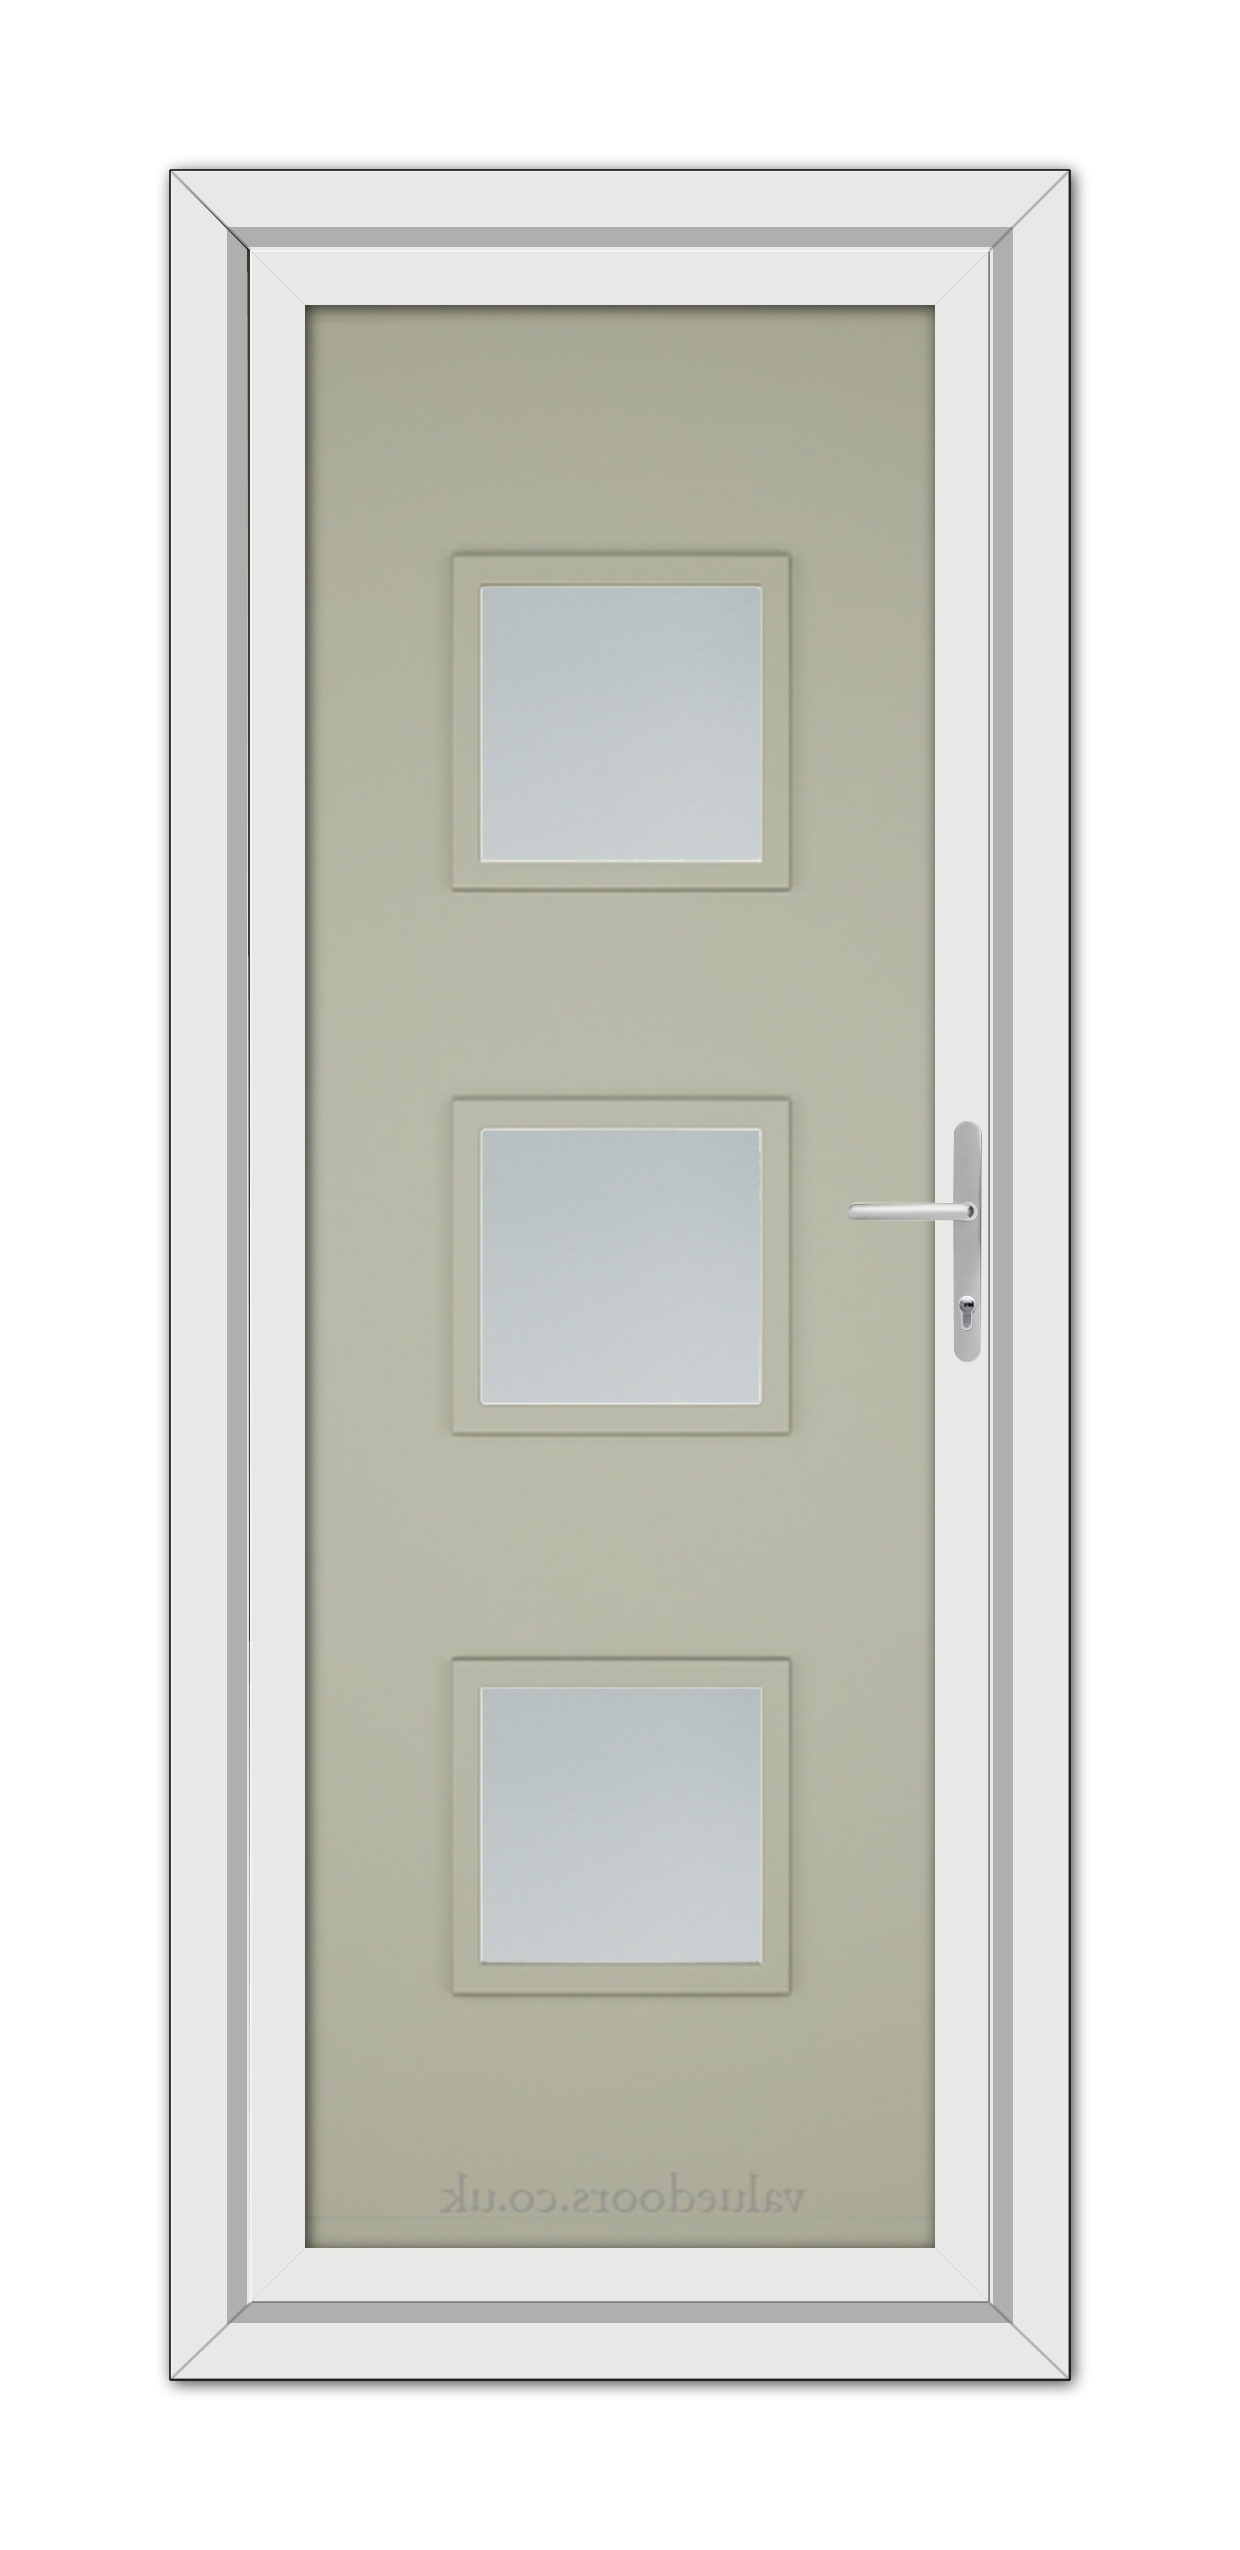 A Agate Grey Modern 5013 uPVC door with a white frame, featuring three frosted glass panels and a silver handle, positioned vertically.